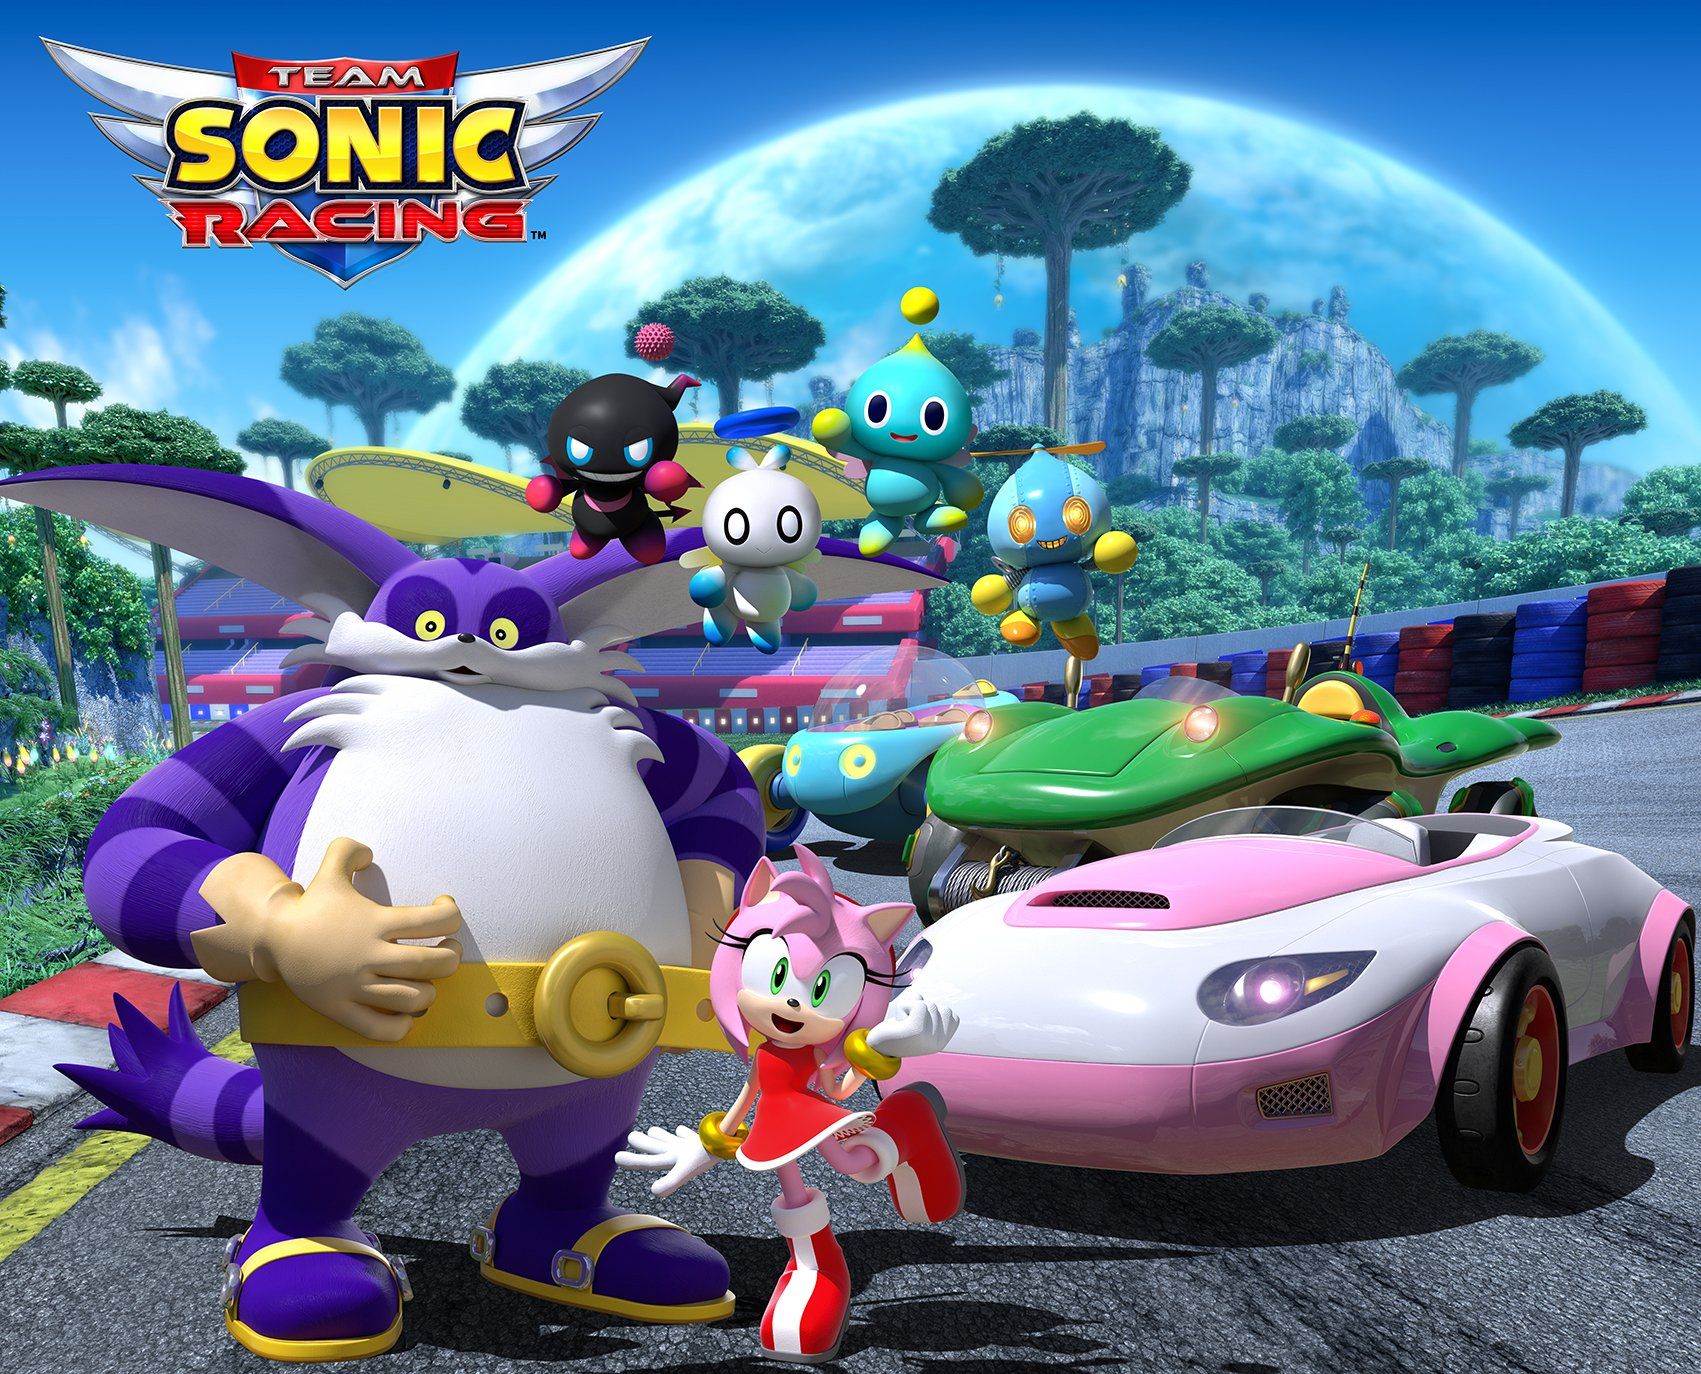 Team Sonic Racing adds Amy Rose, Big the Cat, and Four Chao